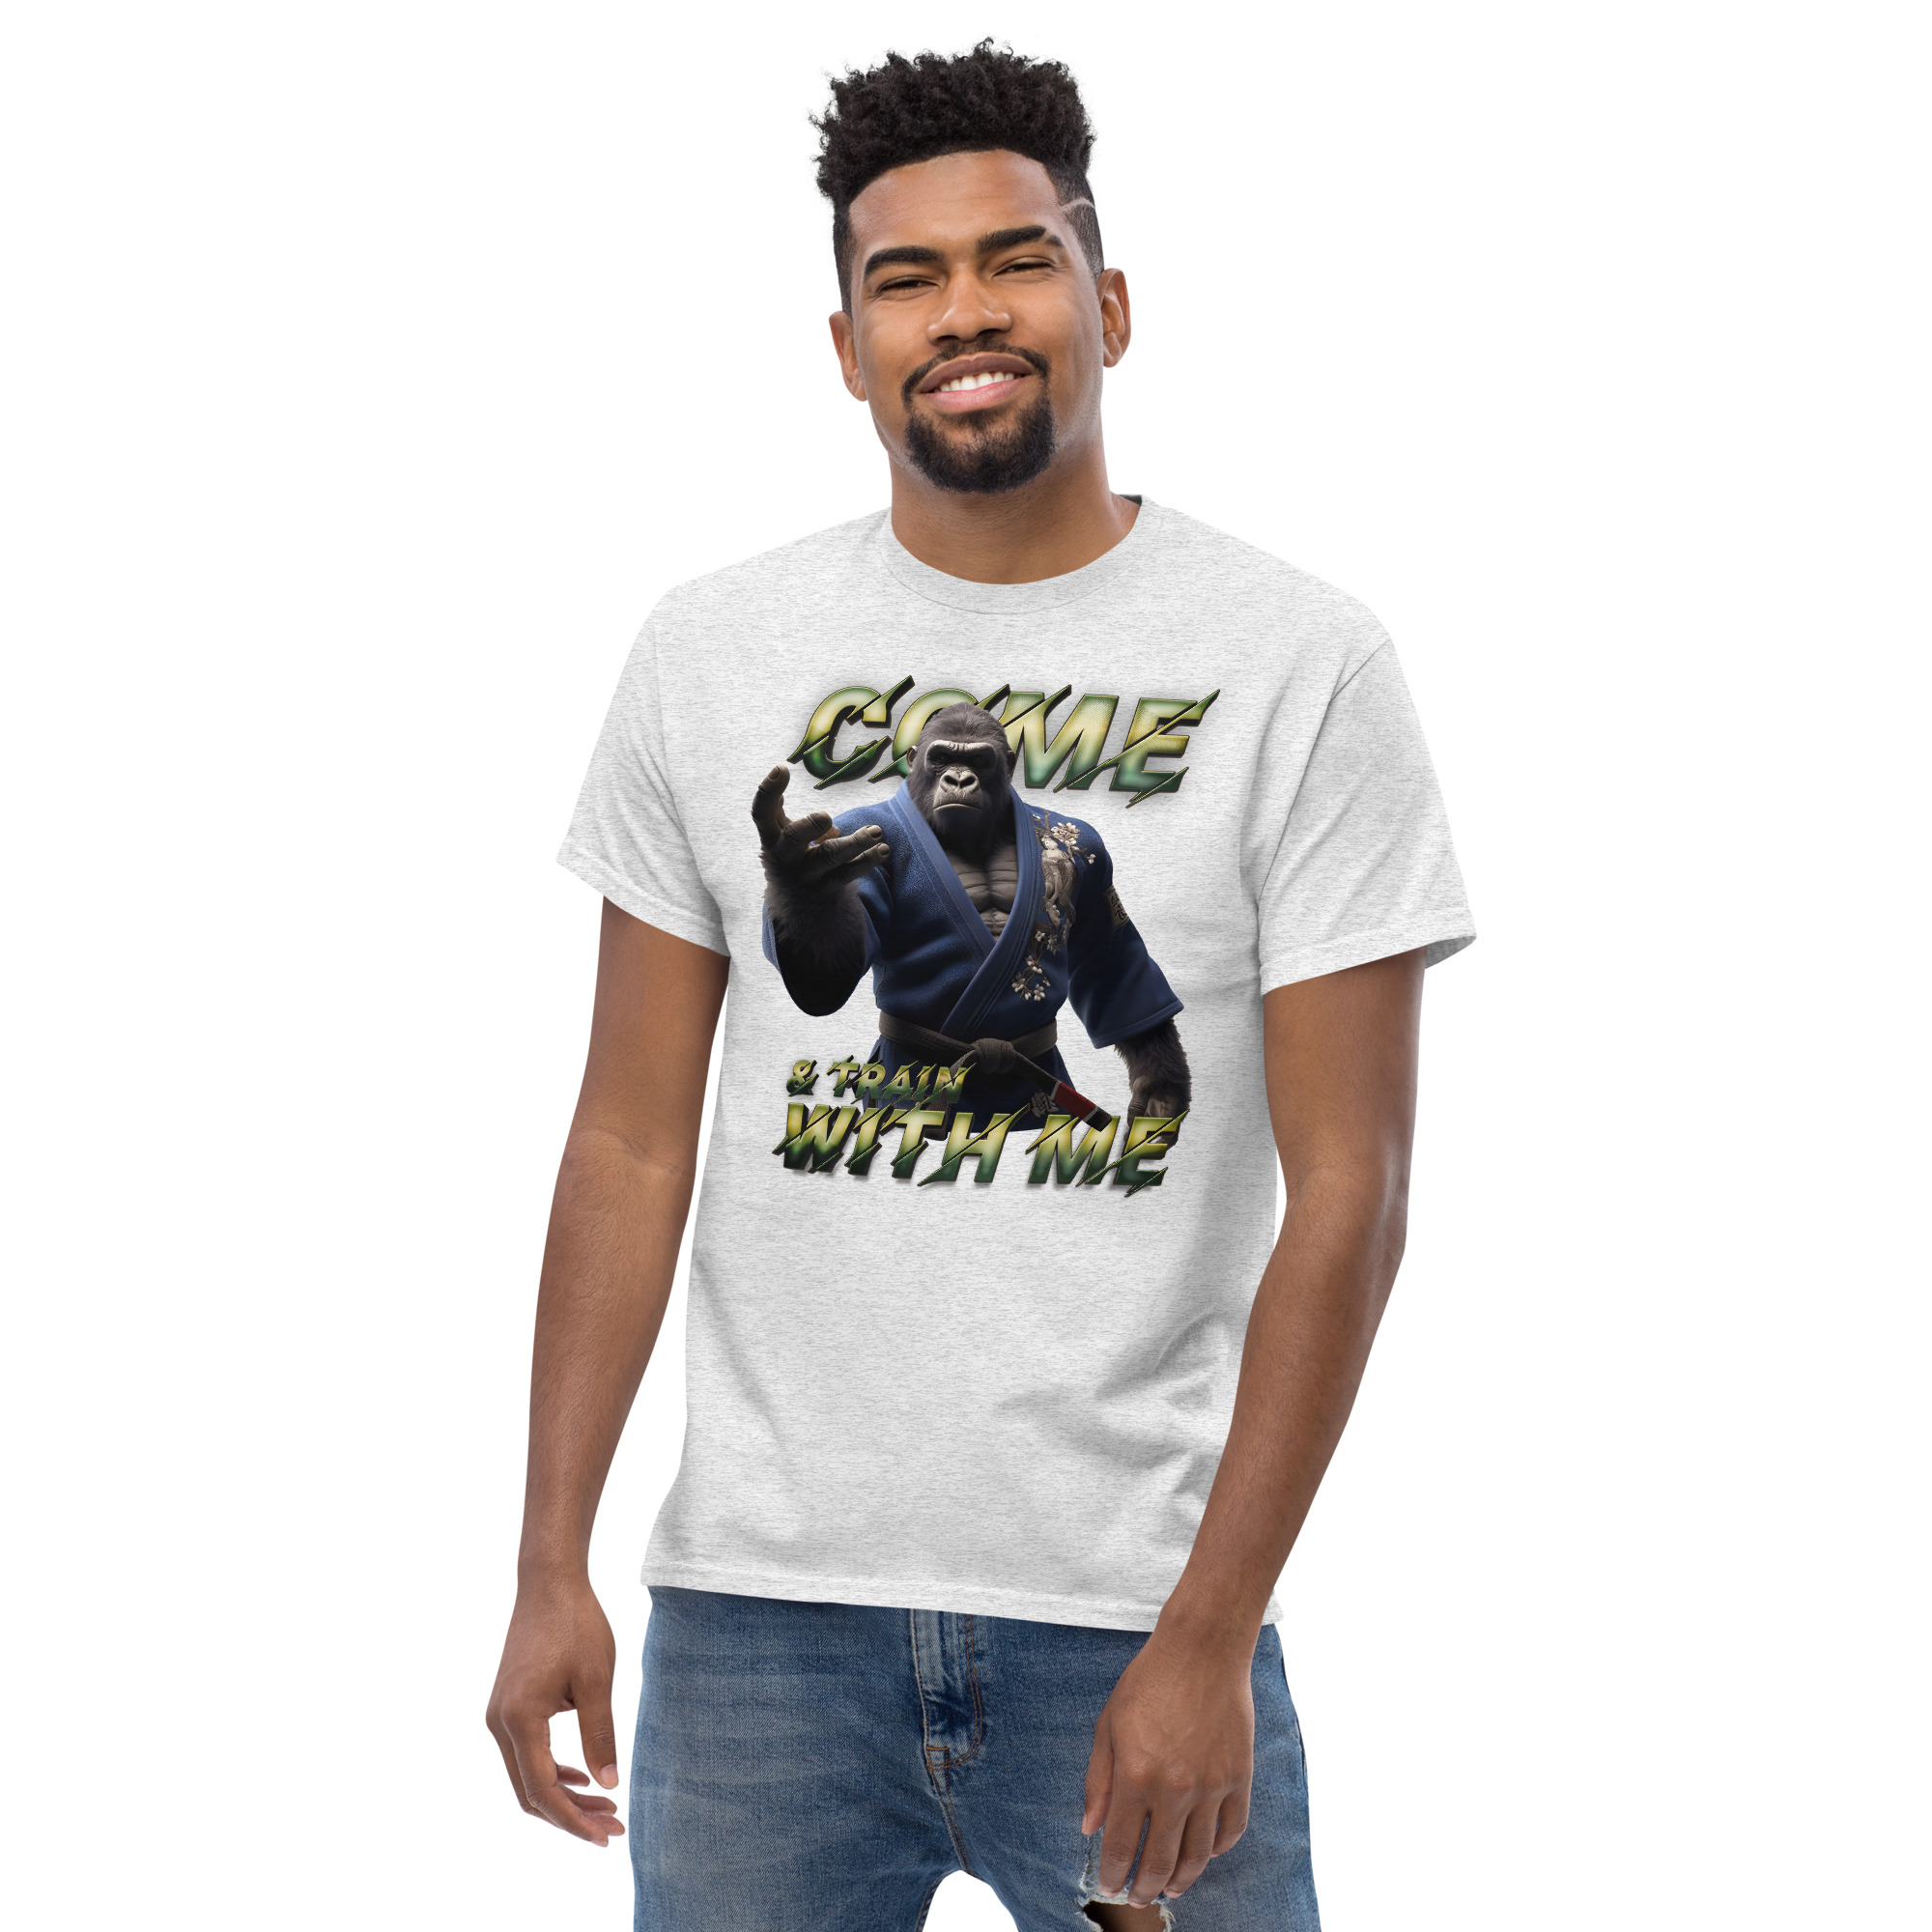 Black Belt Gorilla Challenge Tee: Inviting You to Roll 22